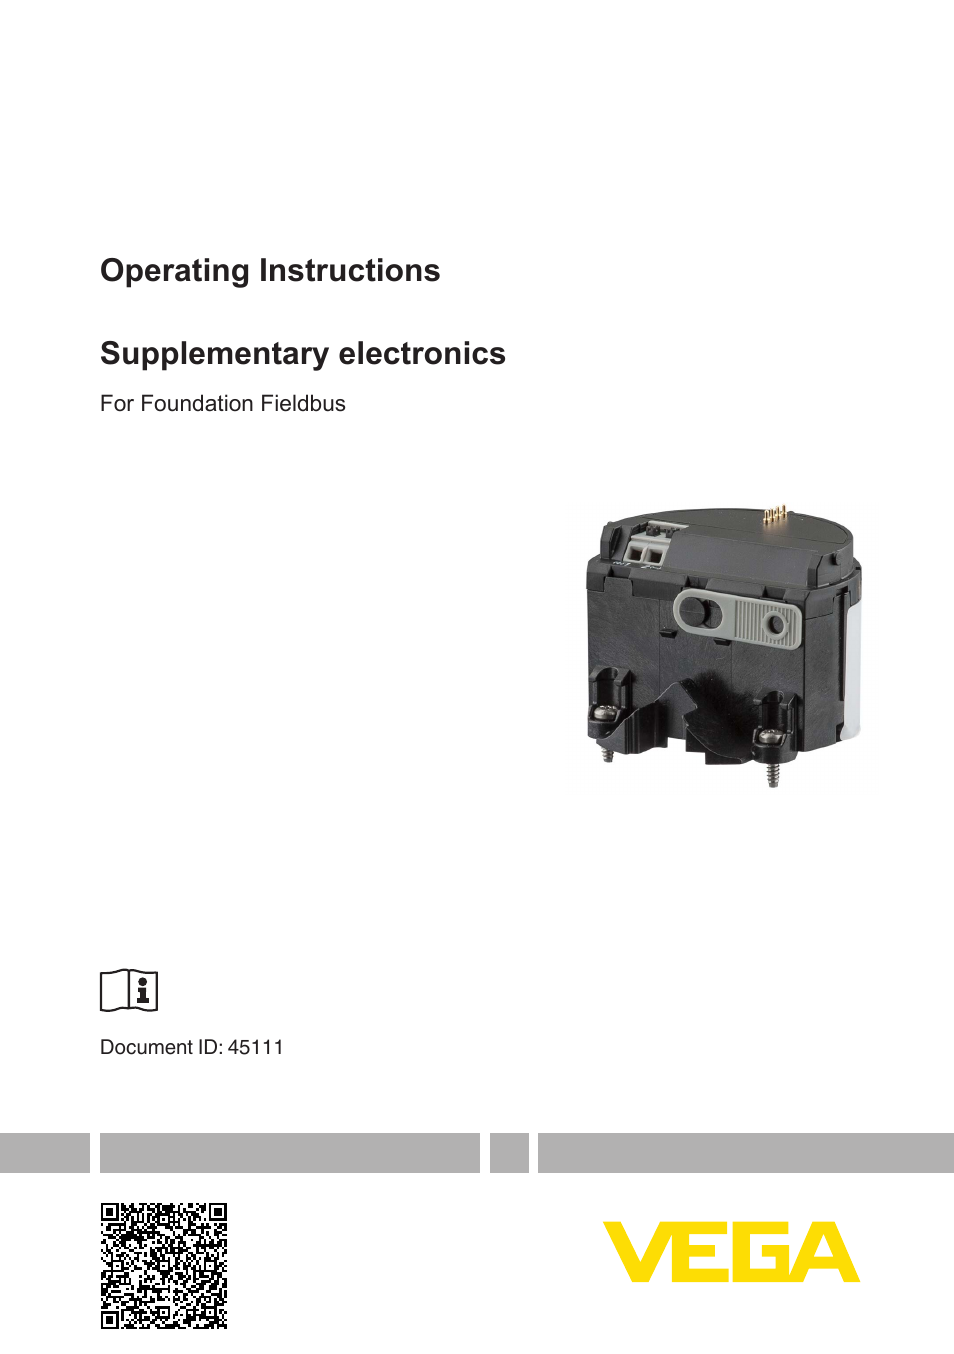 Supplementary electronics For Foundation Fieldbus